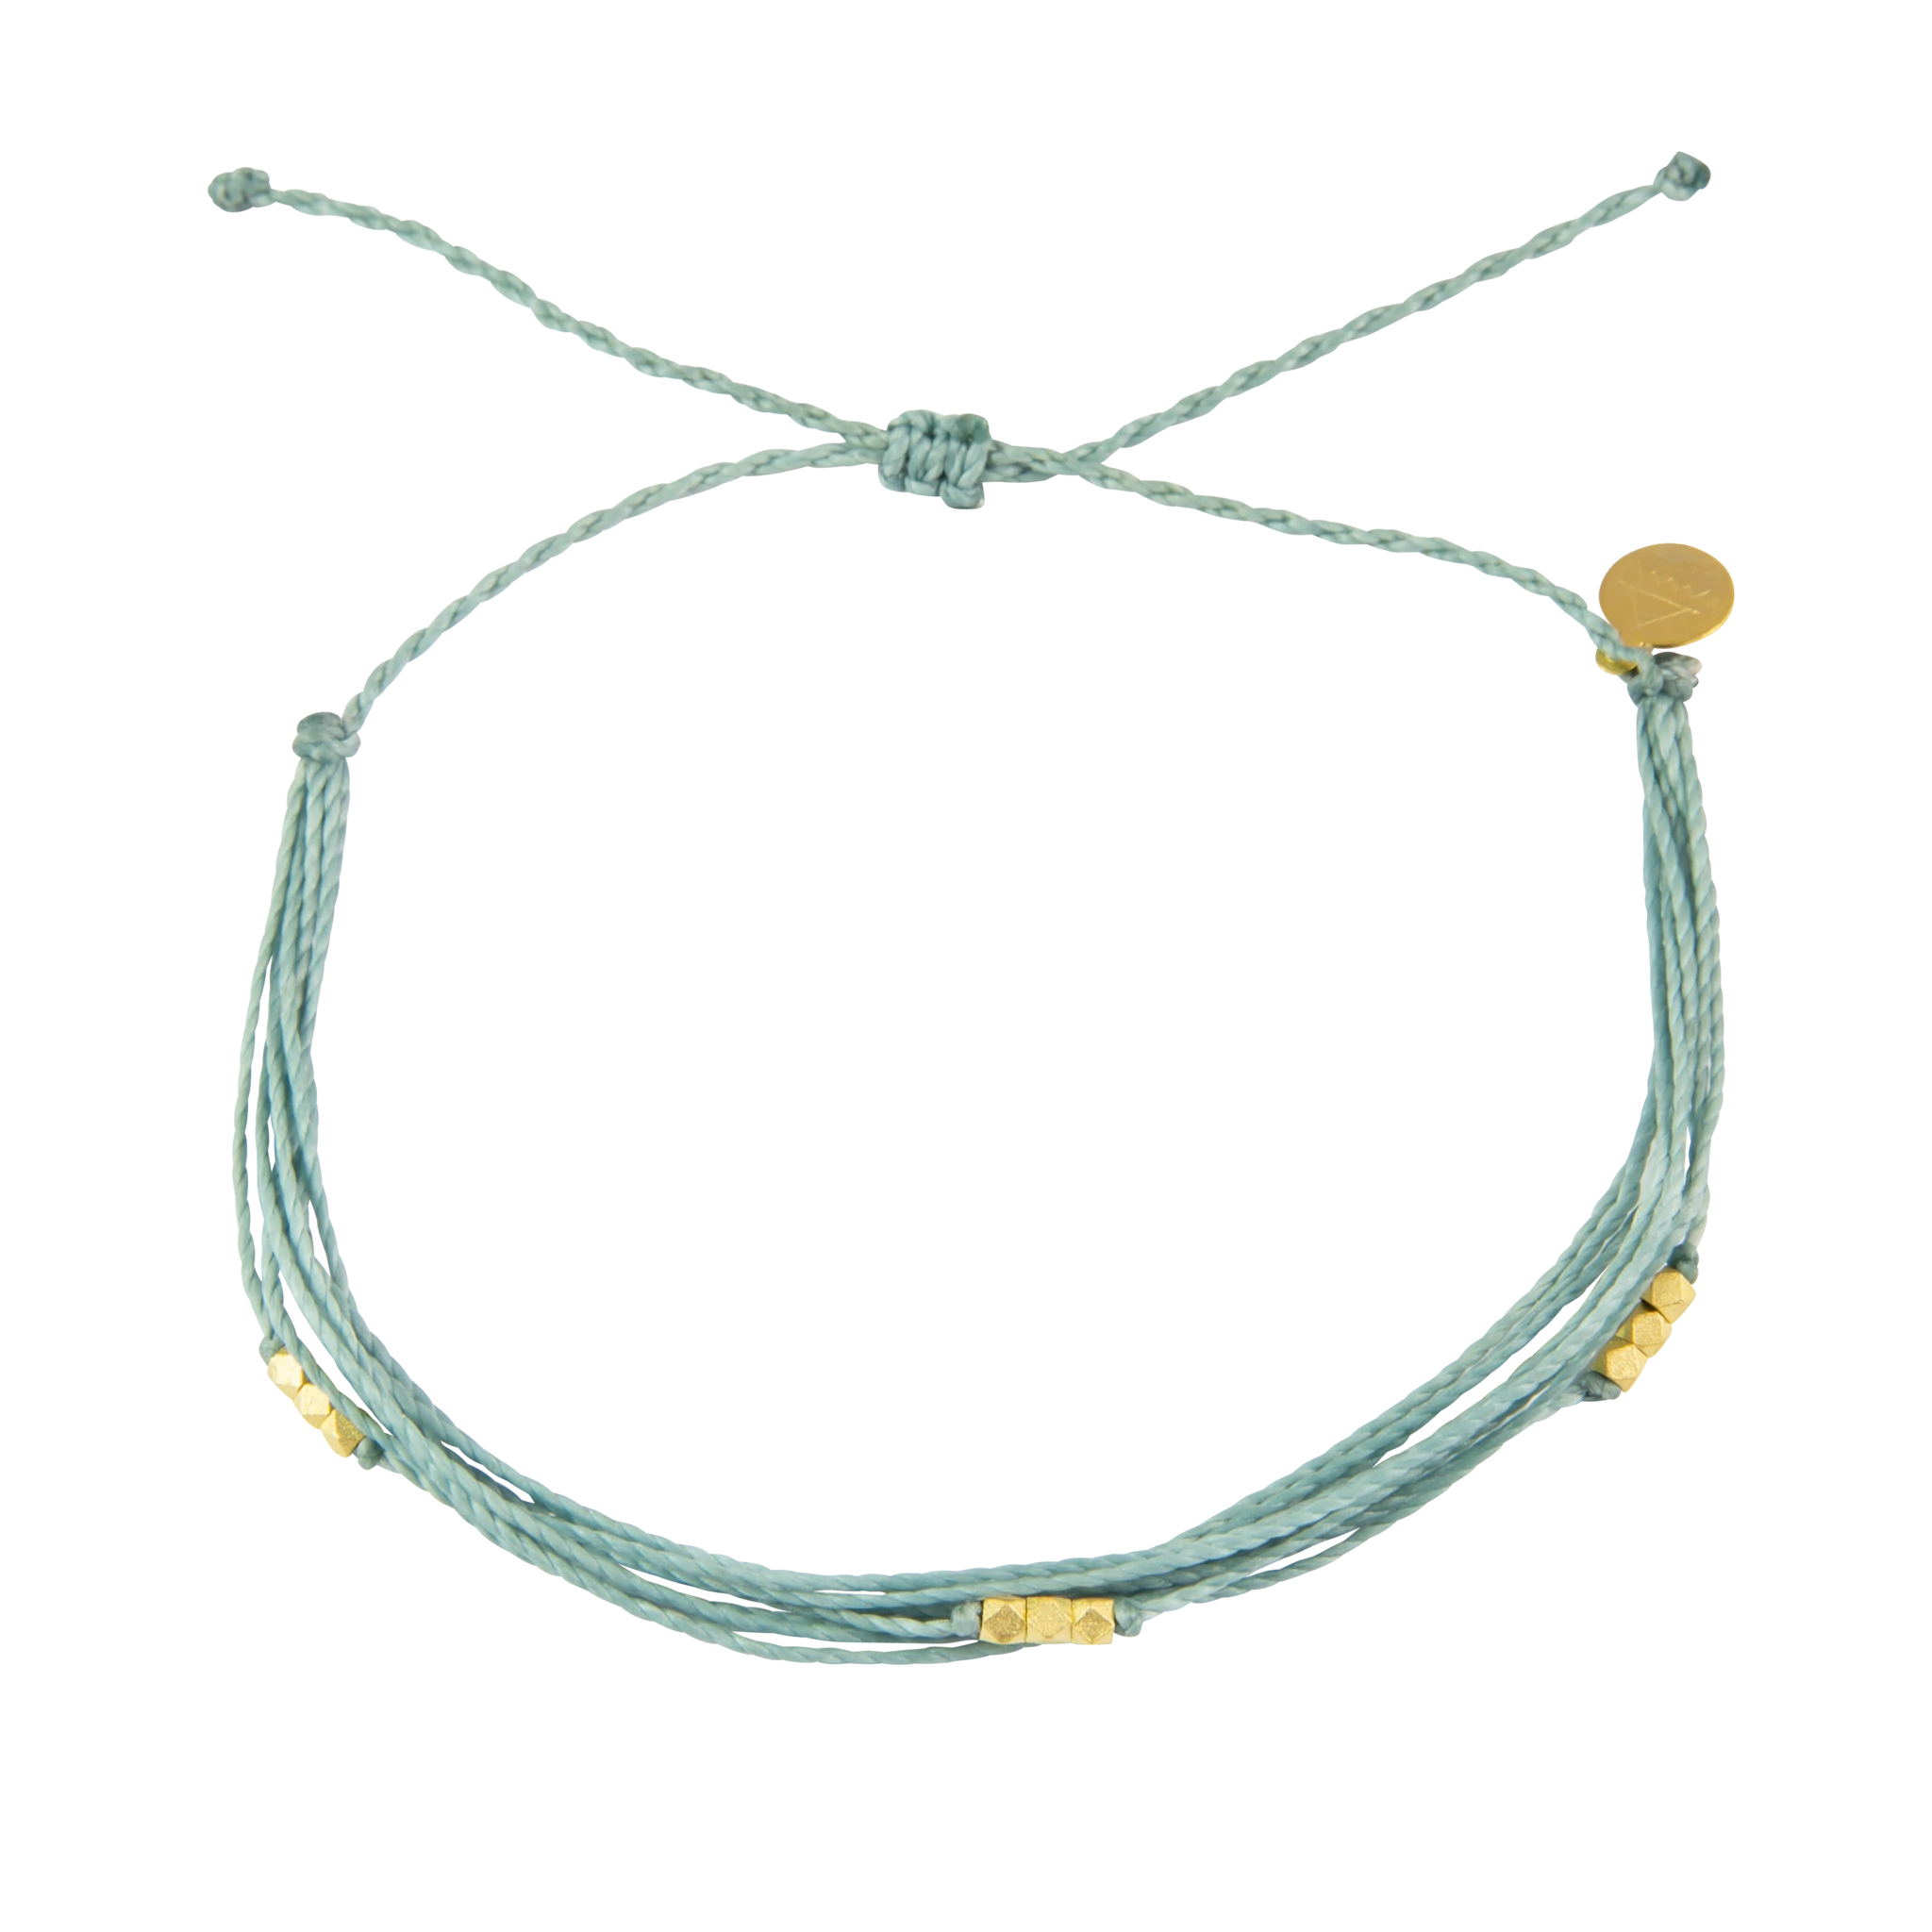 Gold Macua Anklet